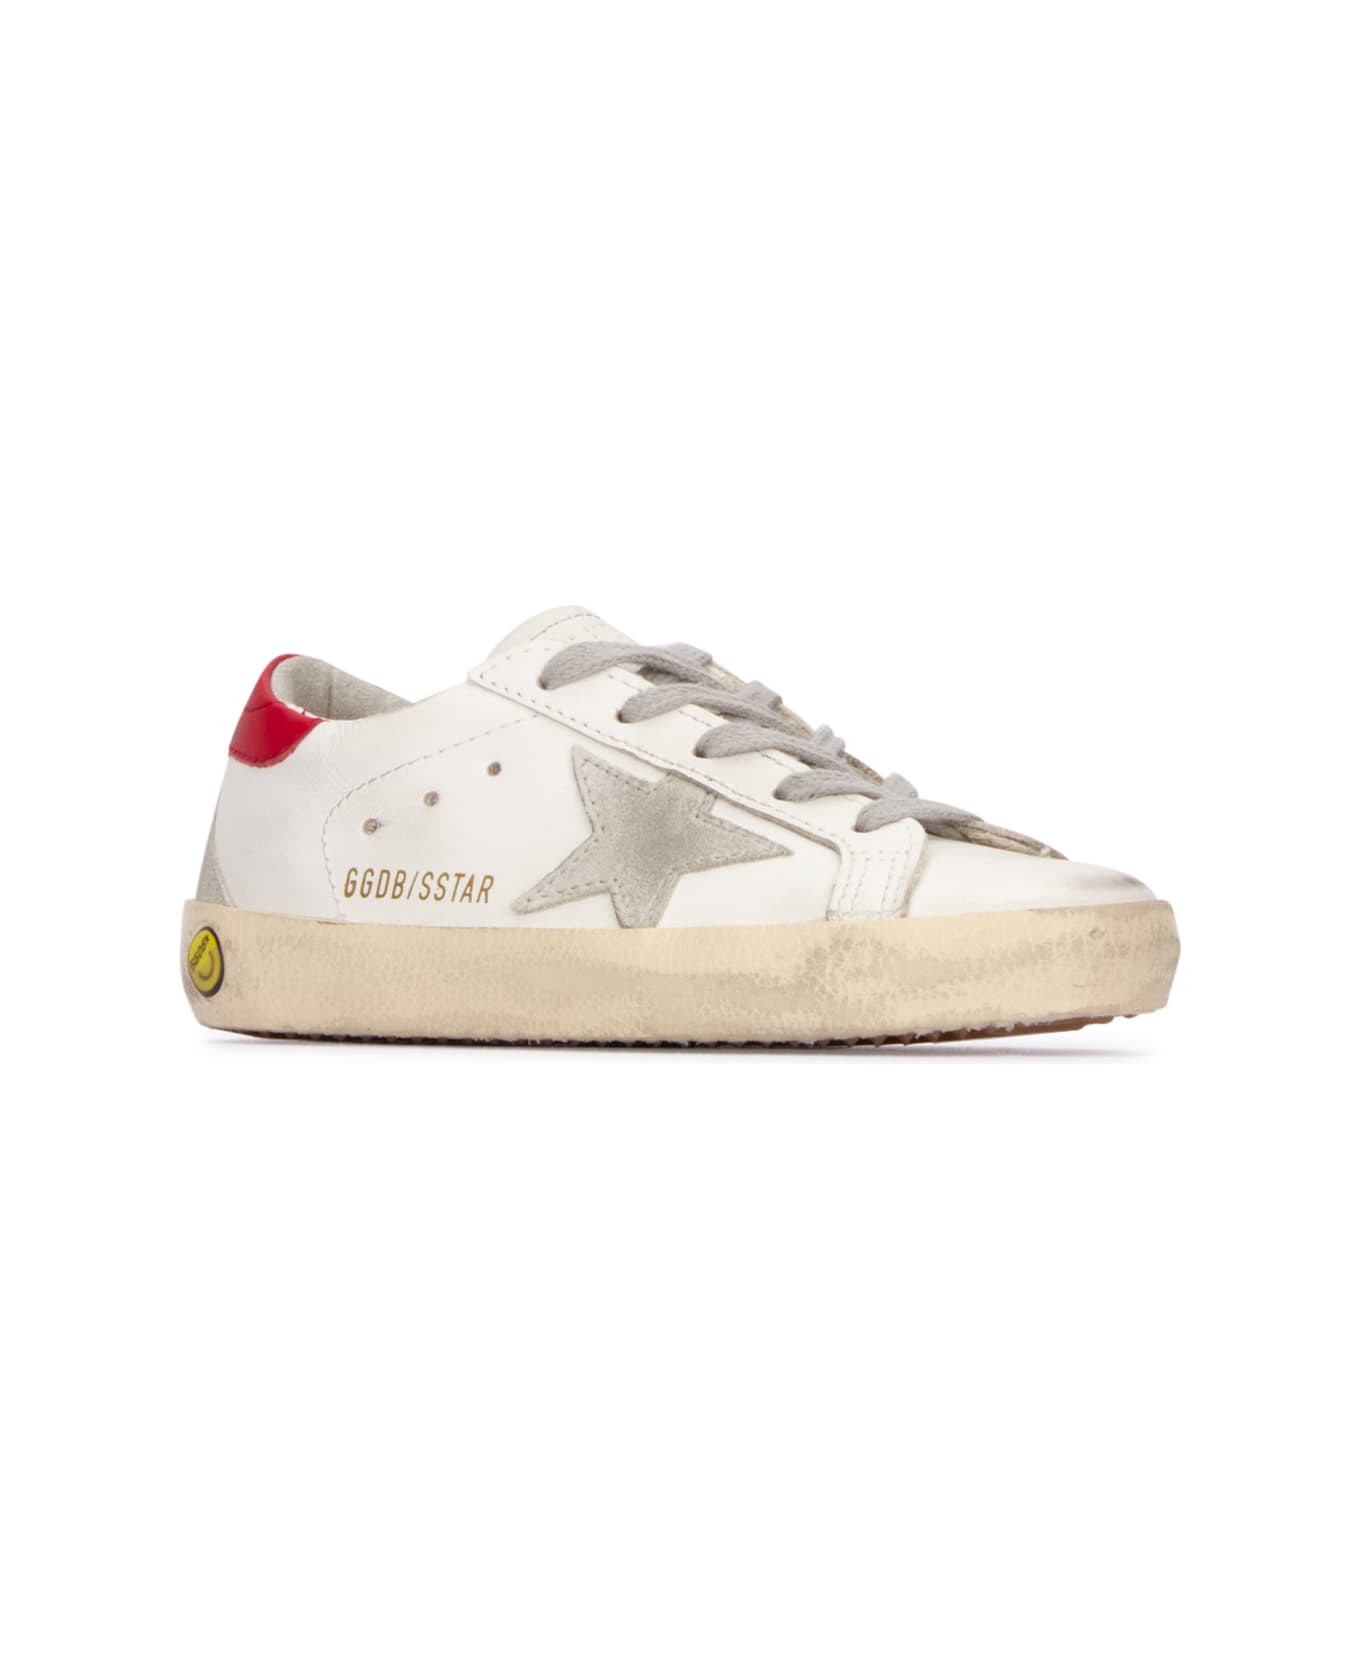 Golden Goose Sneakers - WHITEICERED シューズ